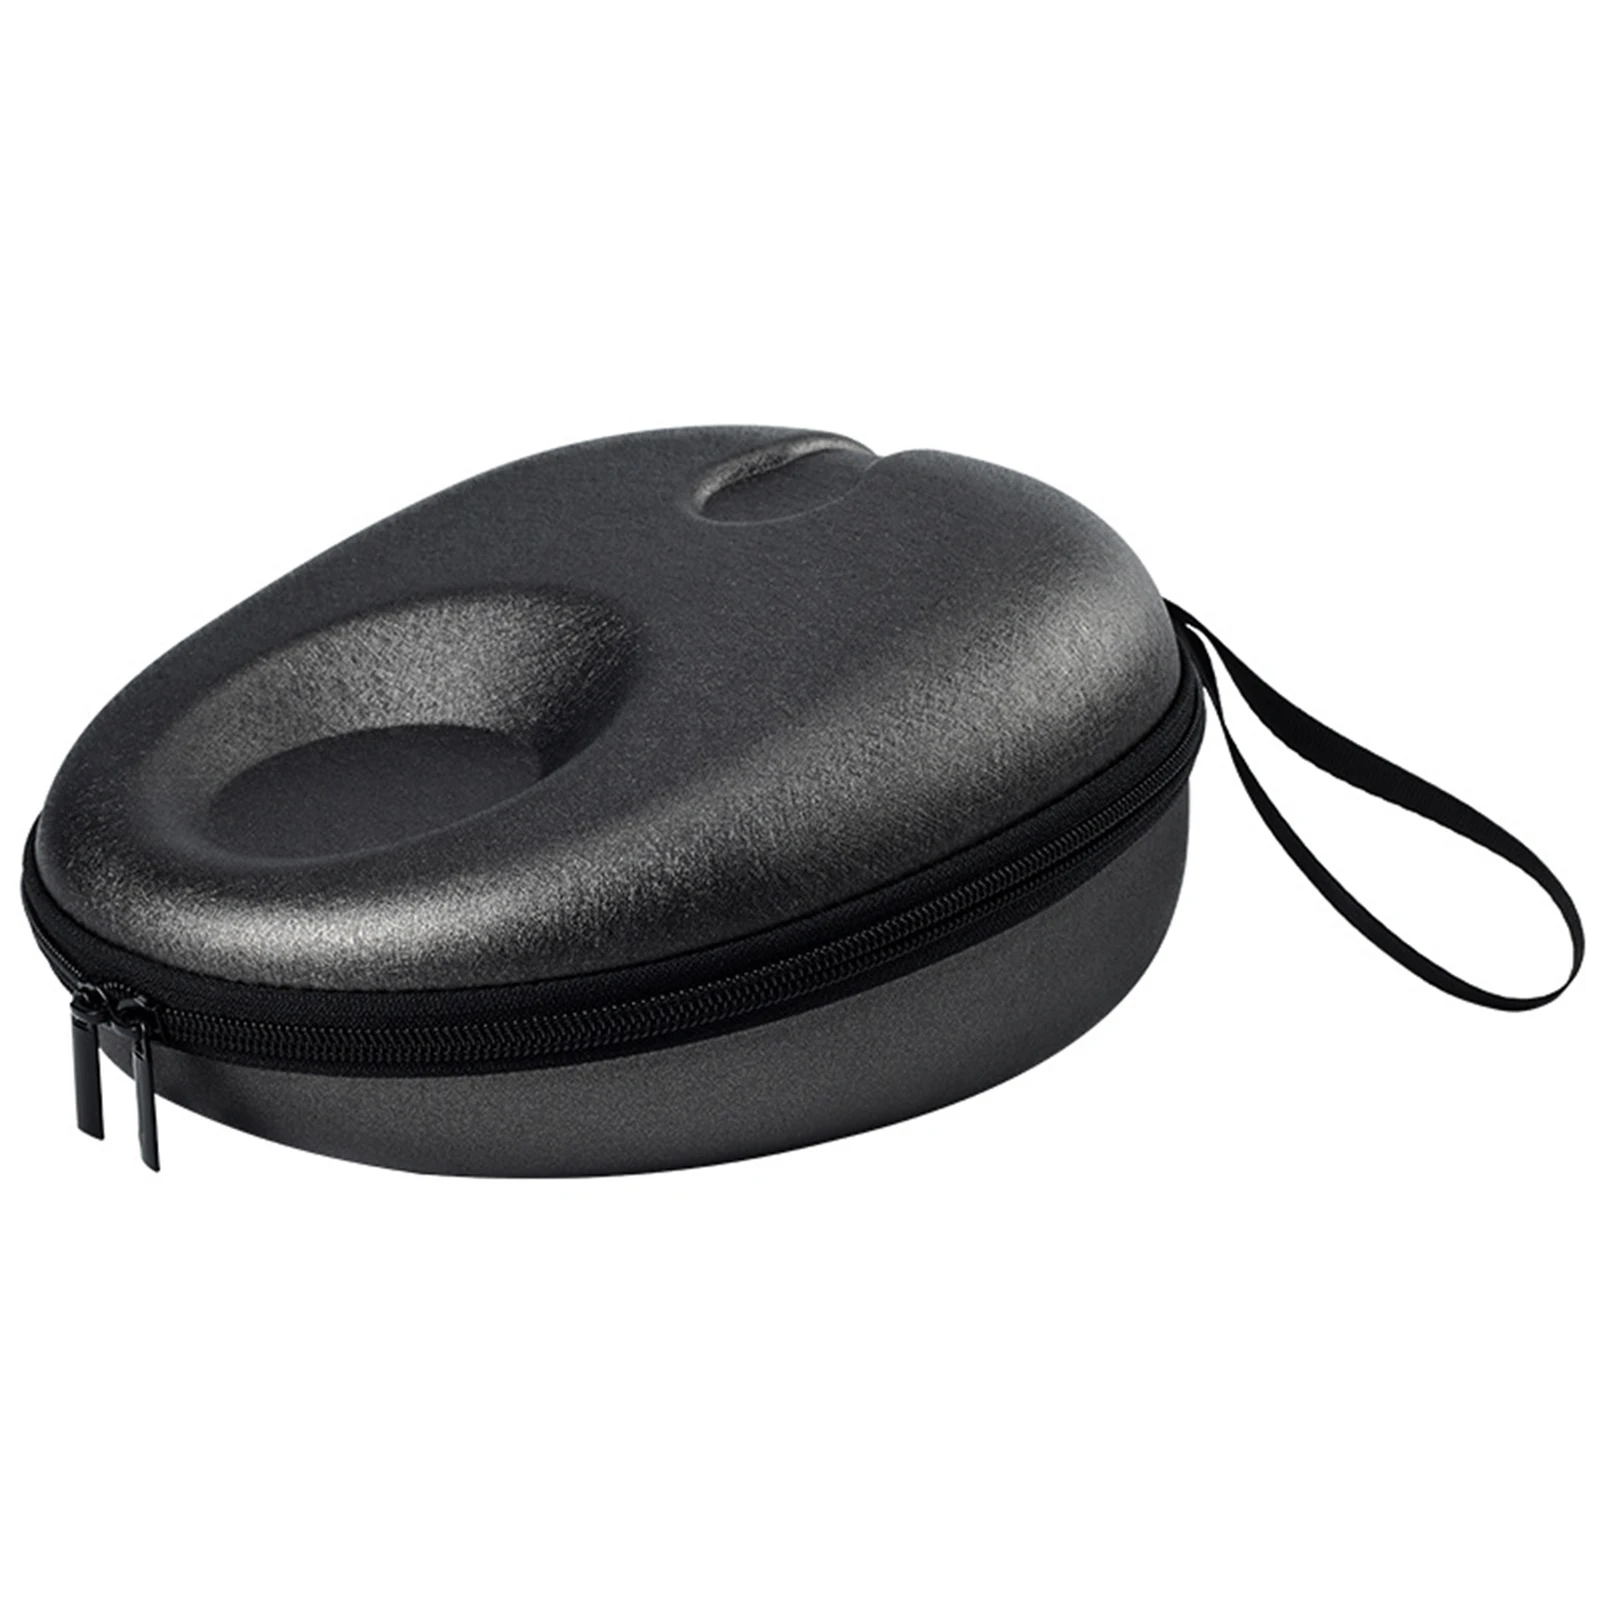 

NEW Travel Carry Headphone Case Storage Bag Handbag For PS5 PULSE 3D Headset Organizer Box Portable Easy Carrying Pouch